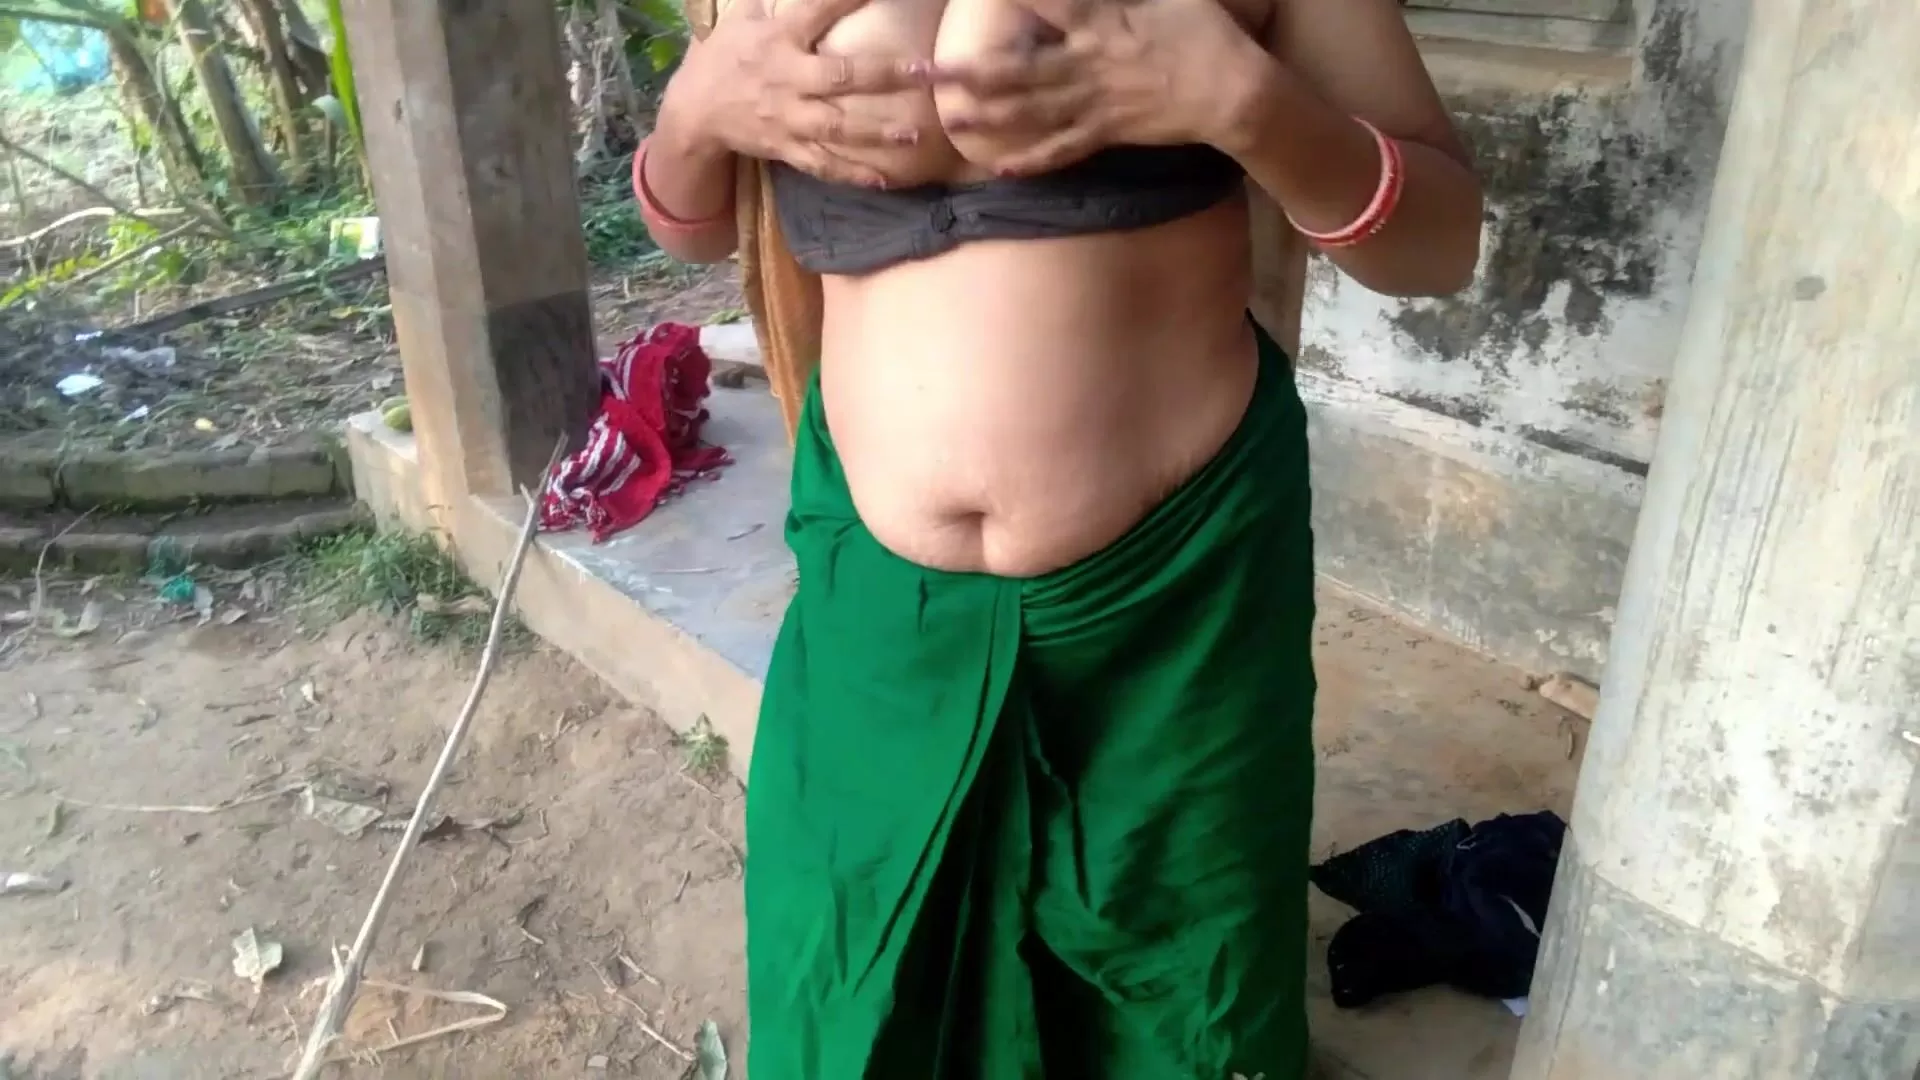 Desi Indian Milf Aunty Outdoor Big Juicy Boobs Flashing Compilation First Time On pH regarder en ligne pic pic